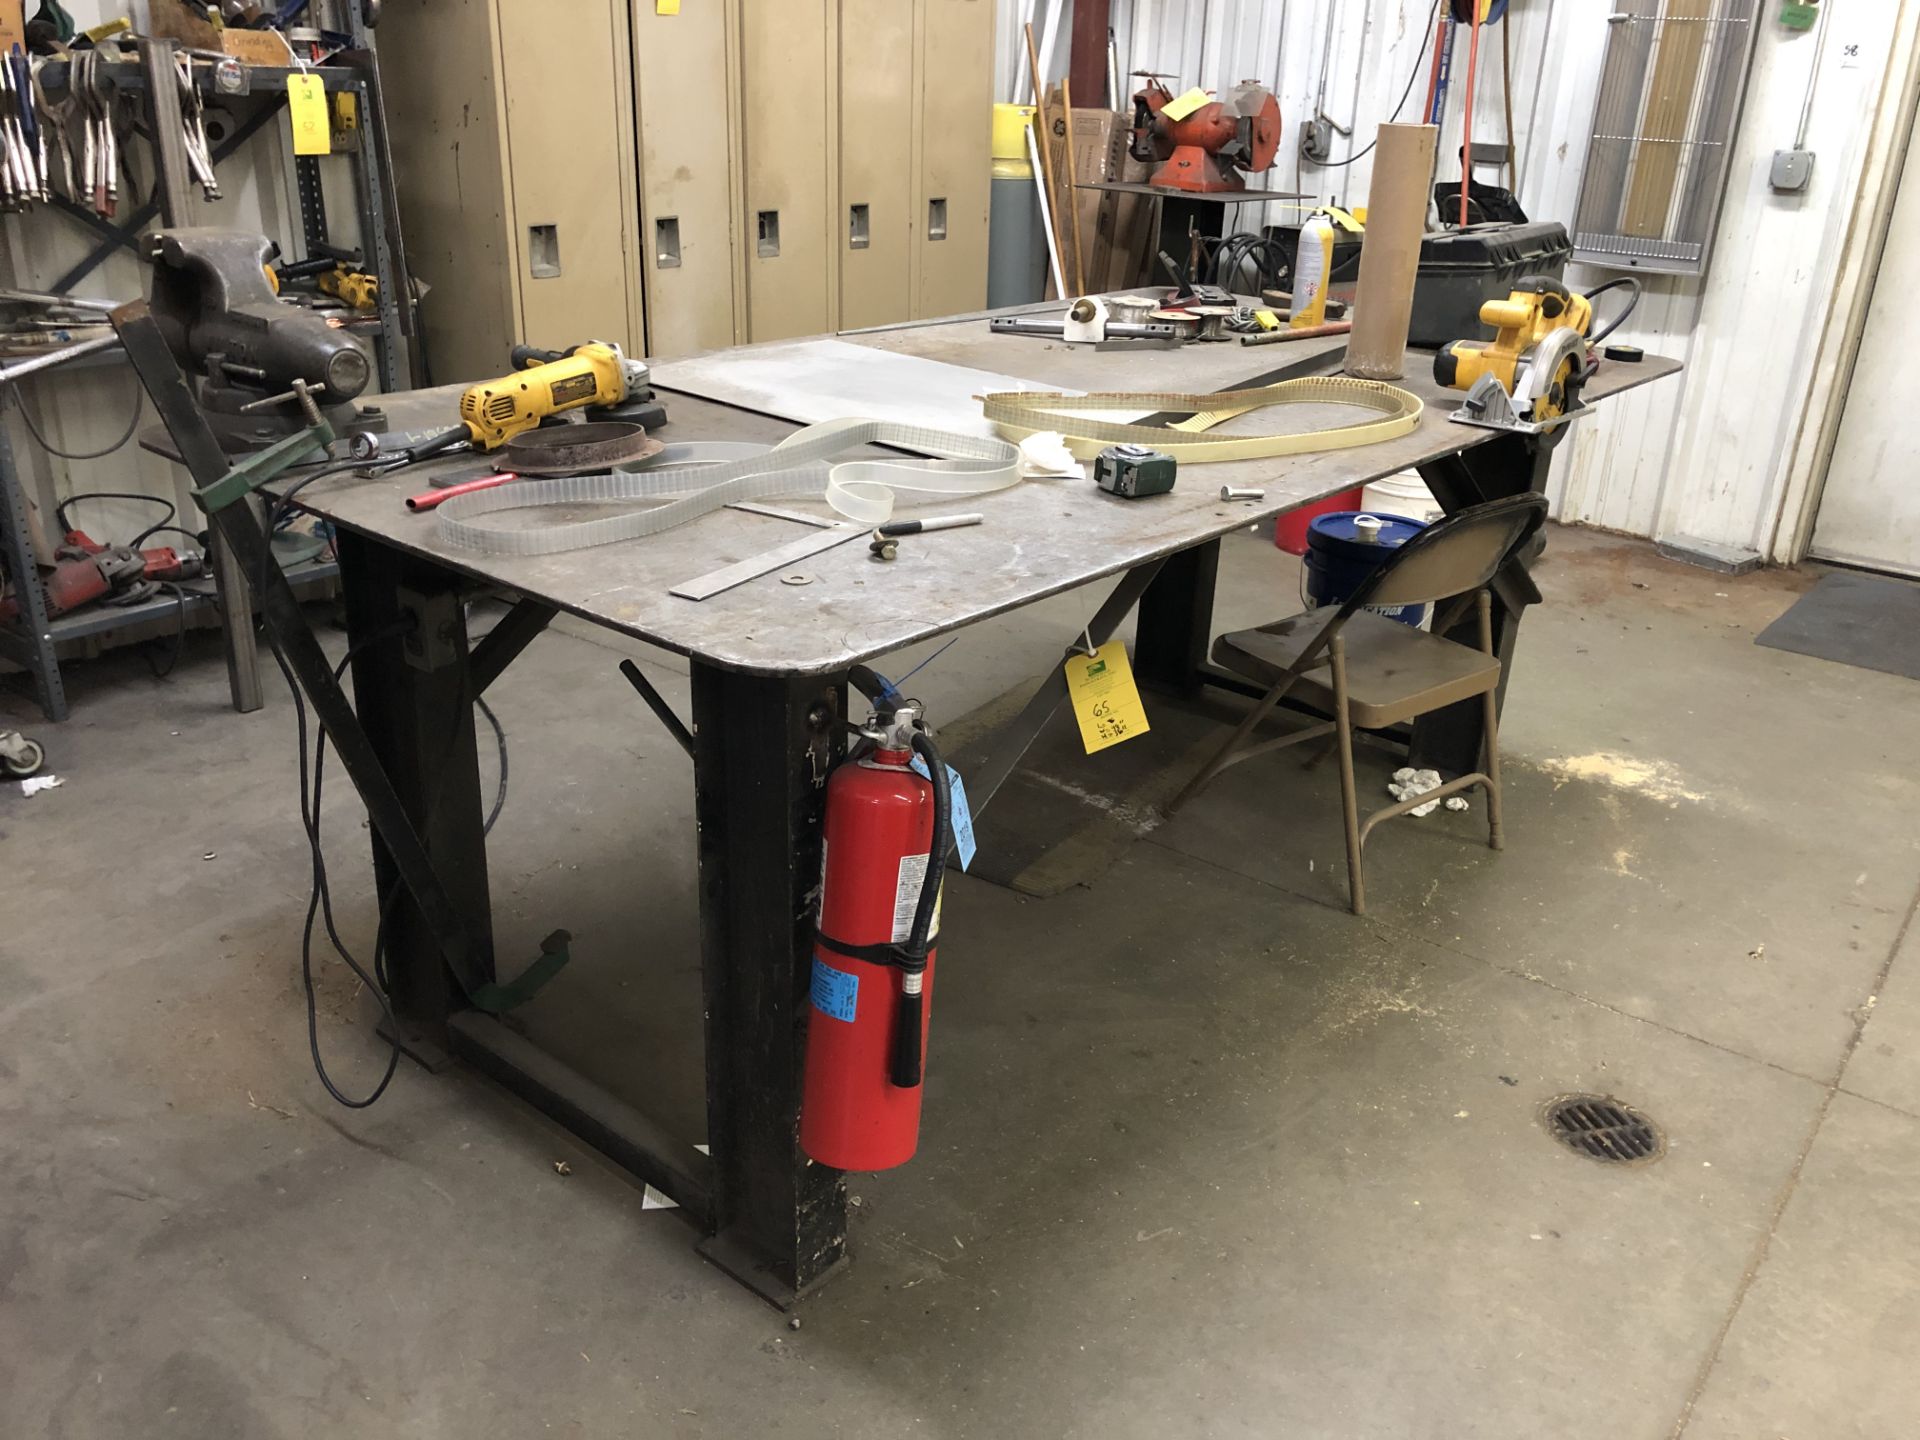 Metal Work Table w/ Contents, 96" Long x 48" Wide x 36" Tall